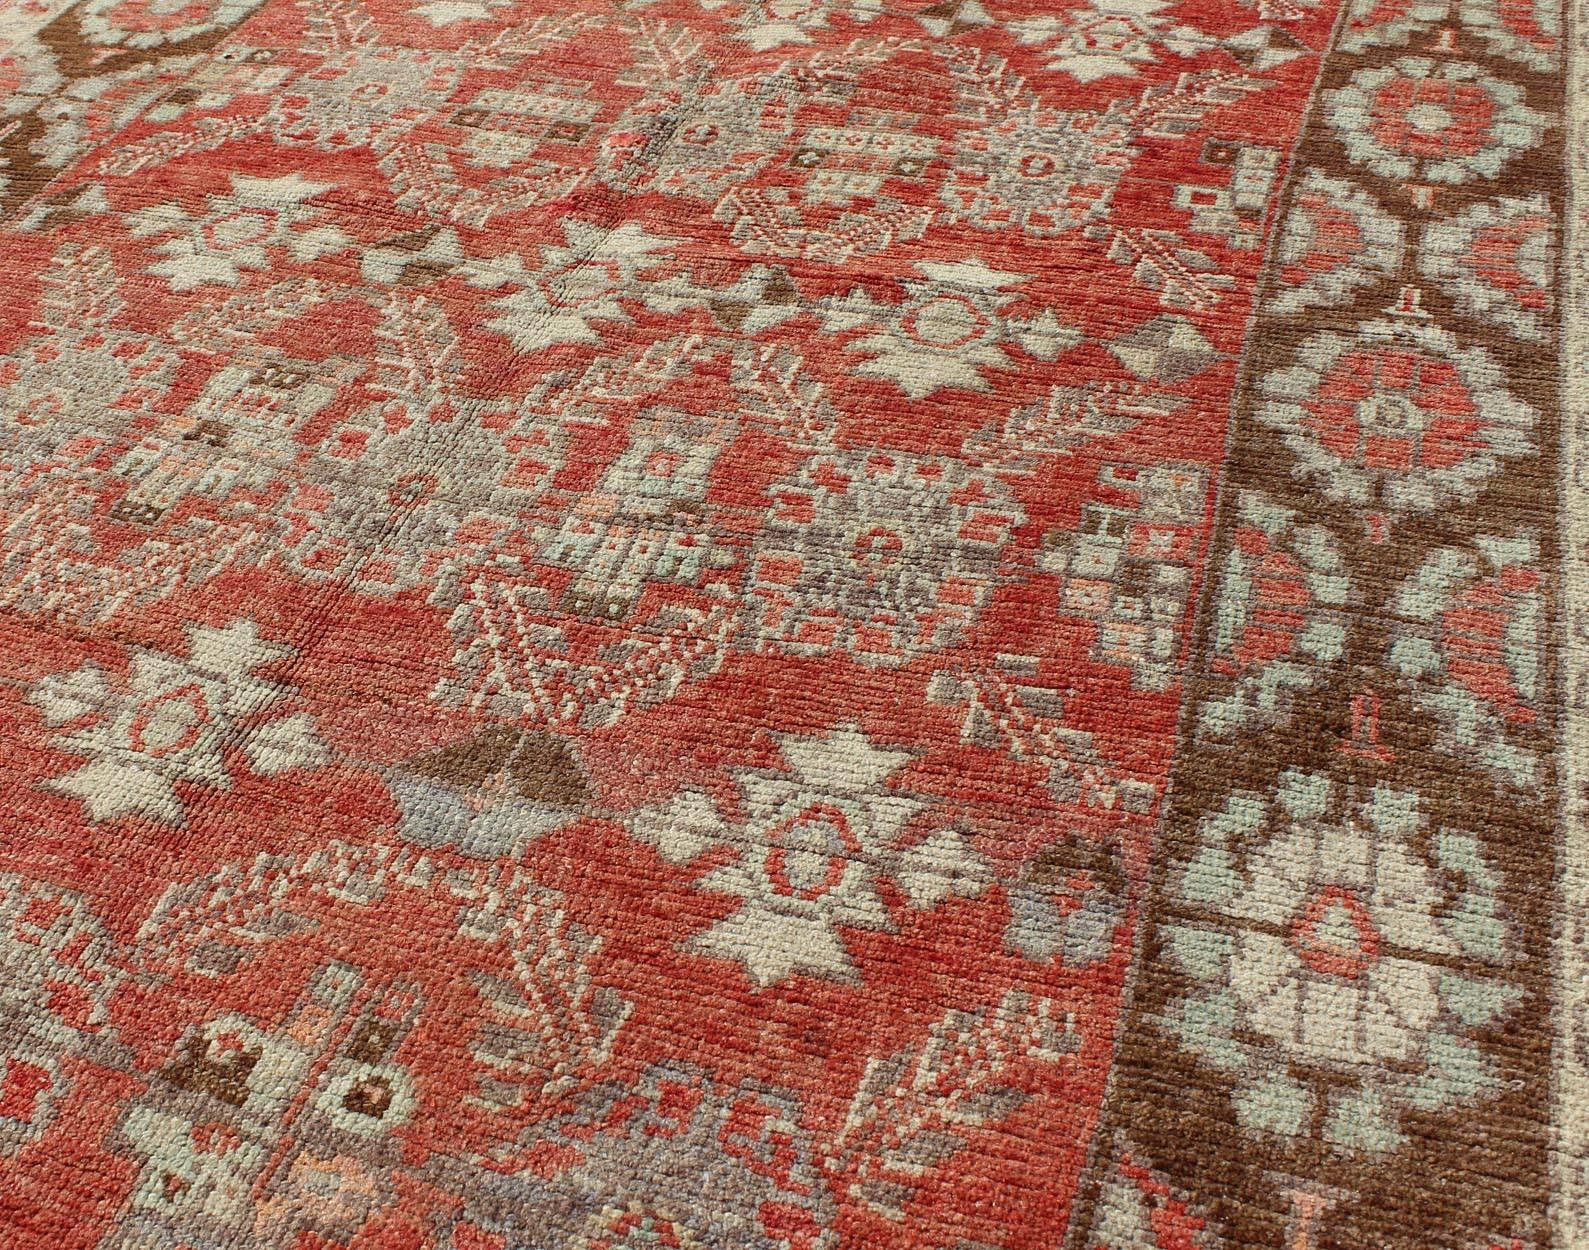 Oushak Rug With Interconnected Floral Designs in Red, Brown & Light Green In Excellent Condition For Sale In Atlanta, GA